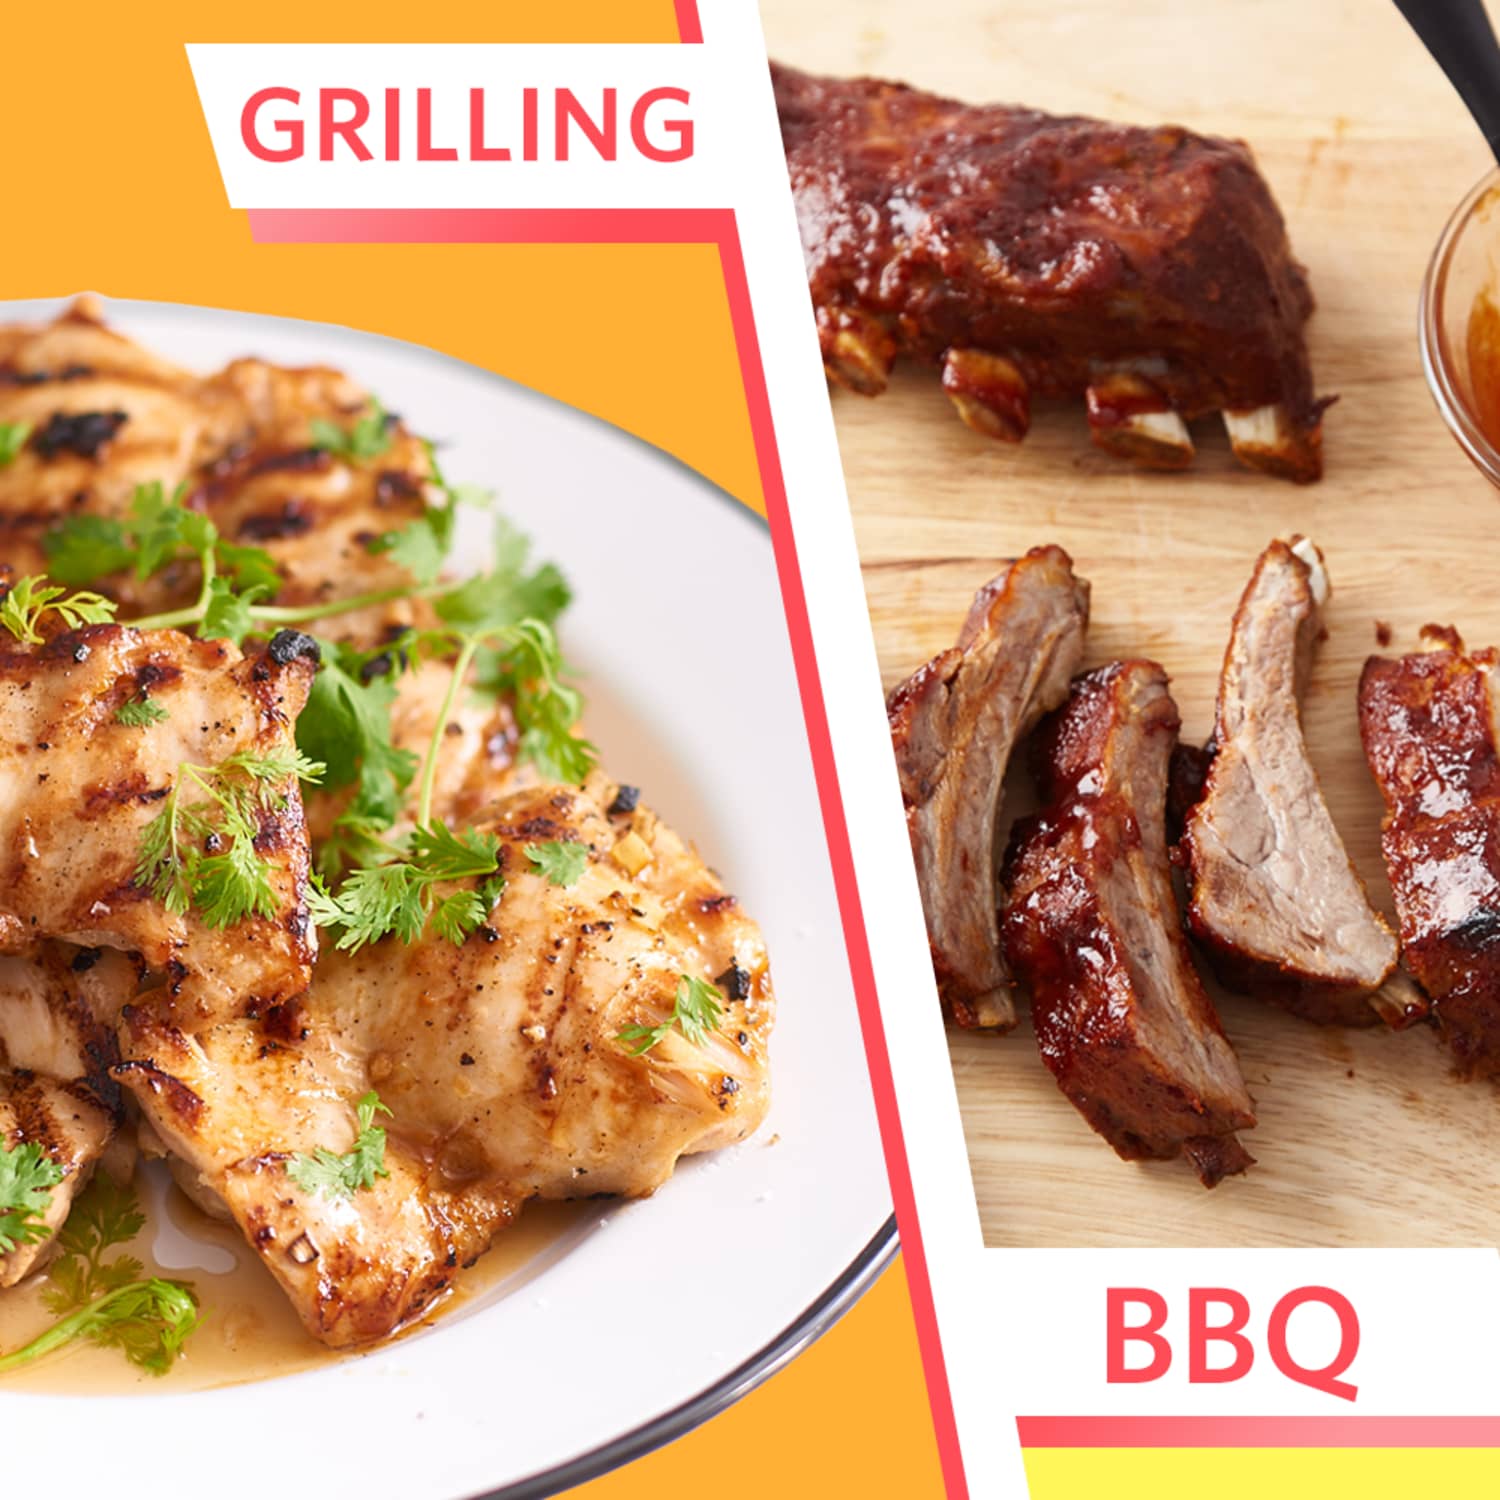 Is Grilling Better Than BBQ?